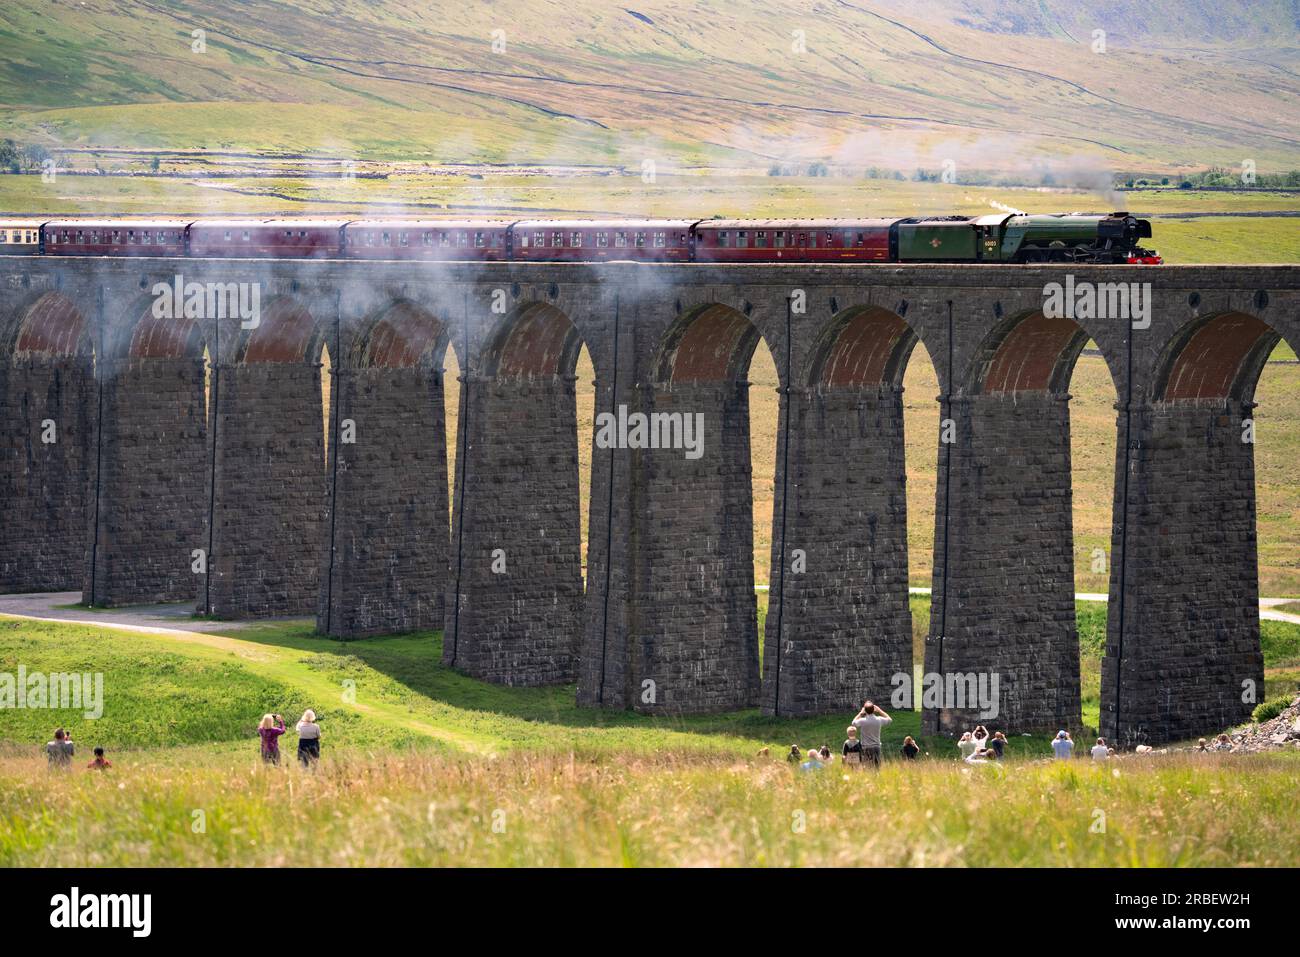 The Flying Scotsman steam train locomotive crosses The Ribblehead Viaduct as crowds of tourists spectate. Stock Photo